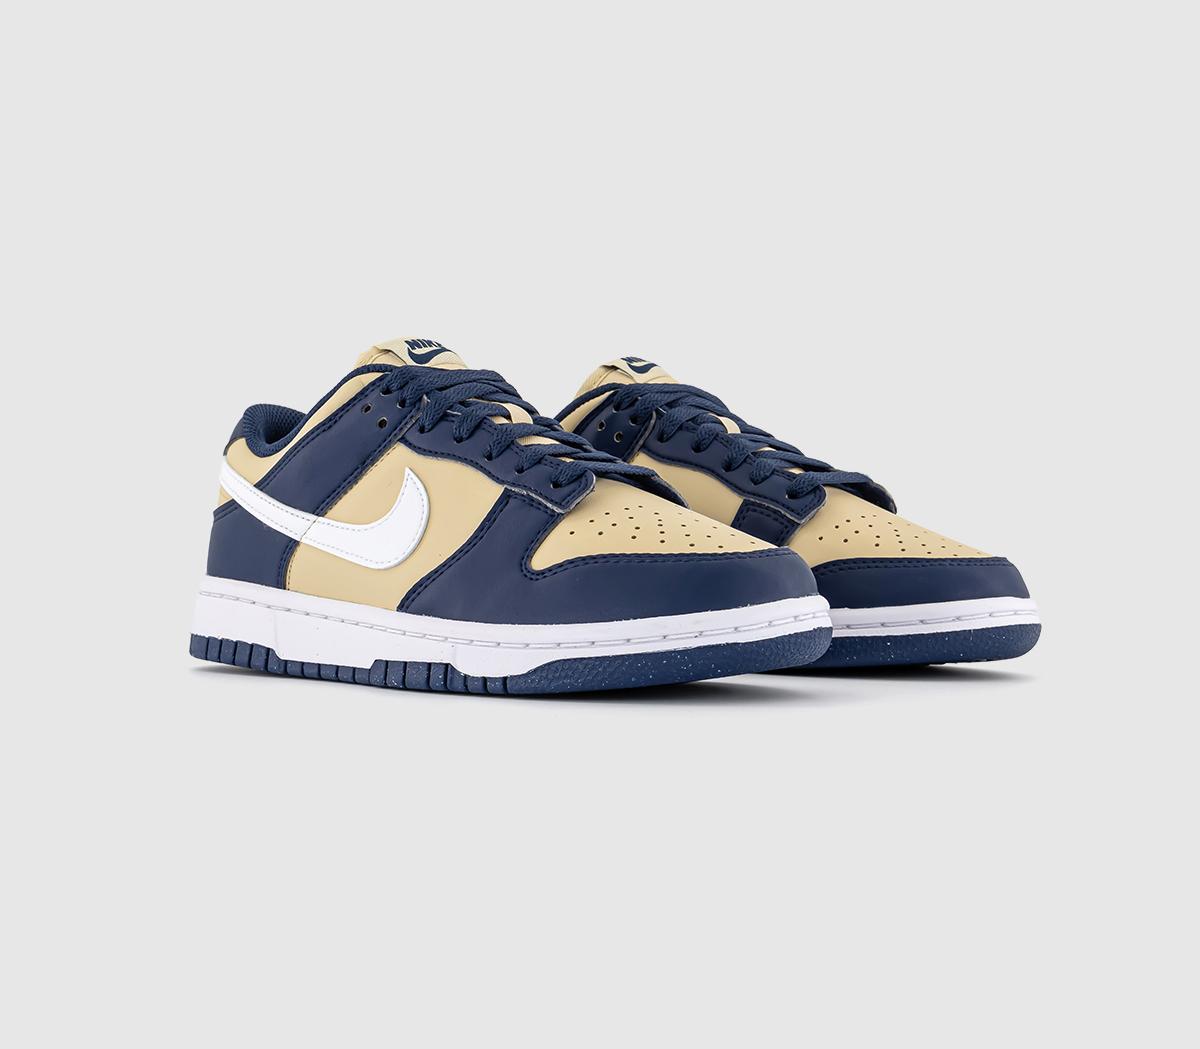 Nike Womens Dunk Low Trainers Midnight Navy White Team Gold Blue, 8